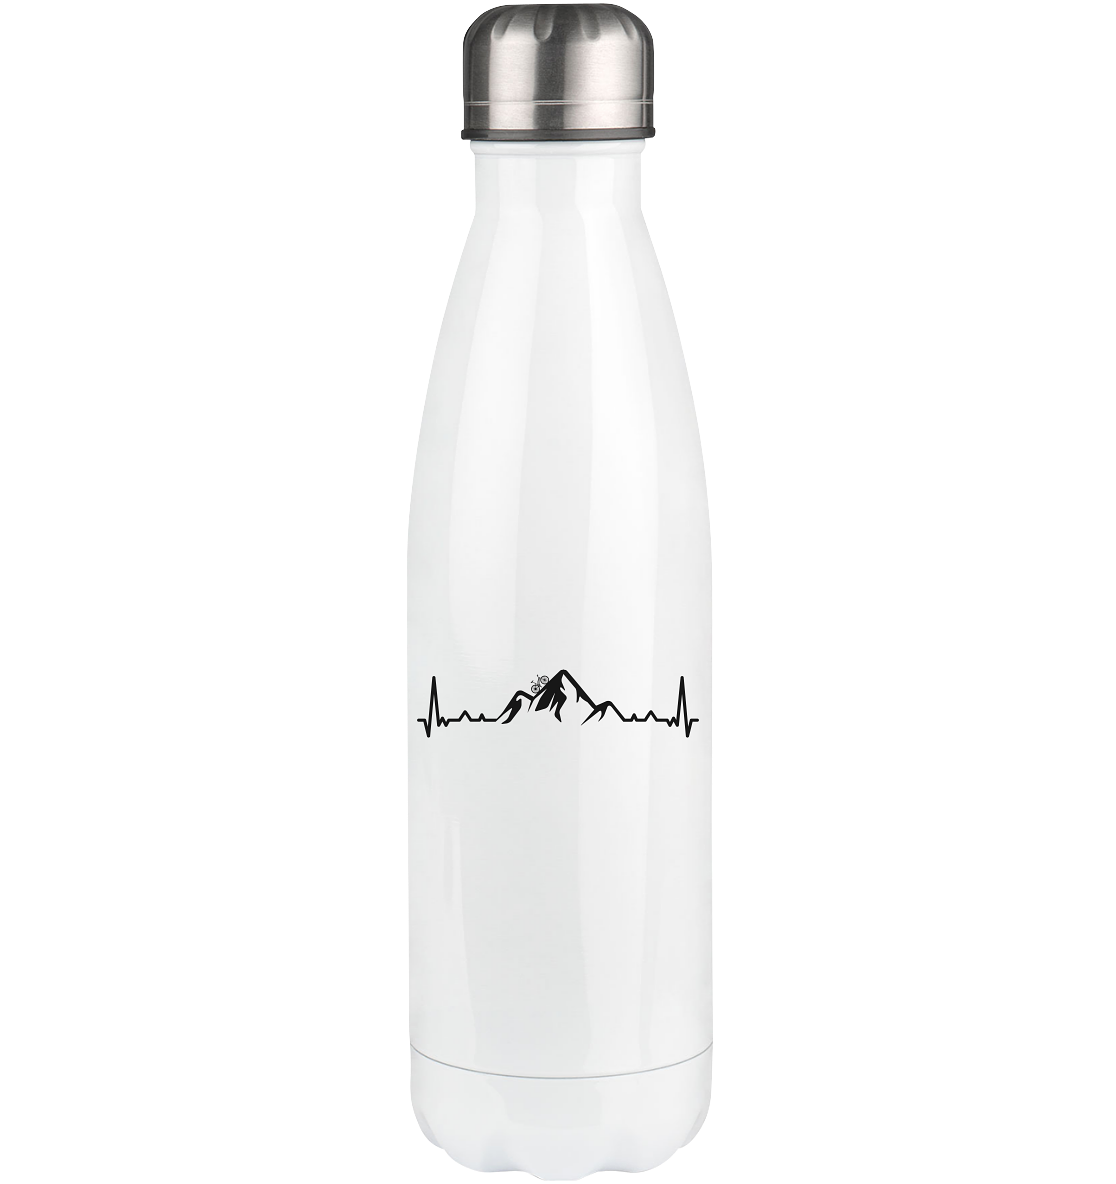 Heartbeat Mountain and Bicycle - Edelstahl Thermosflasche fahrrad 500ml